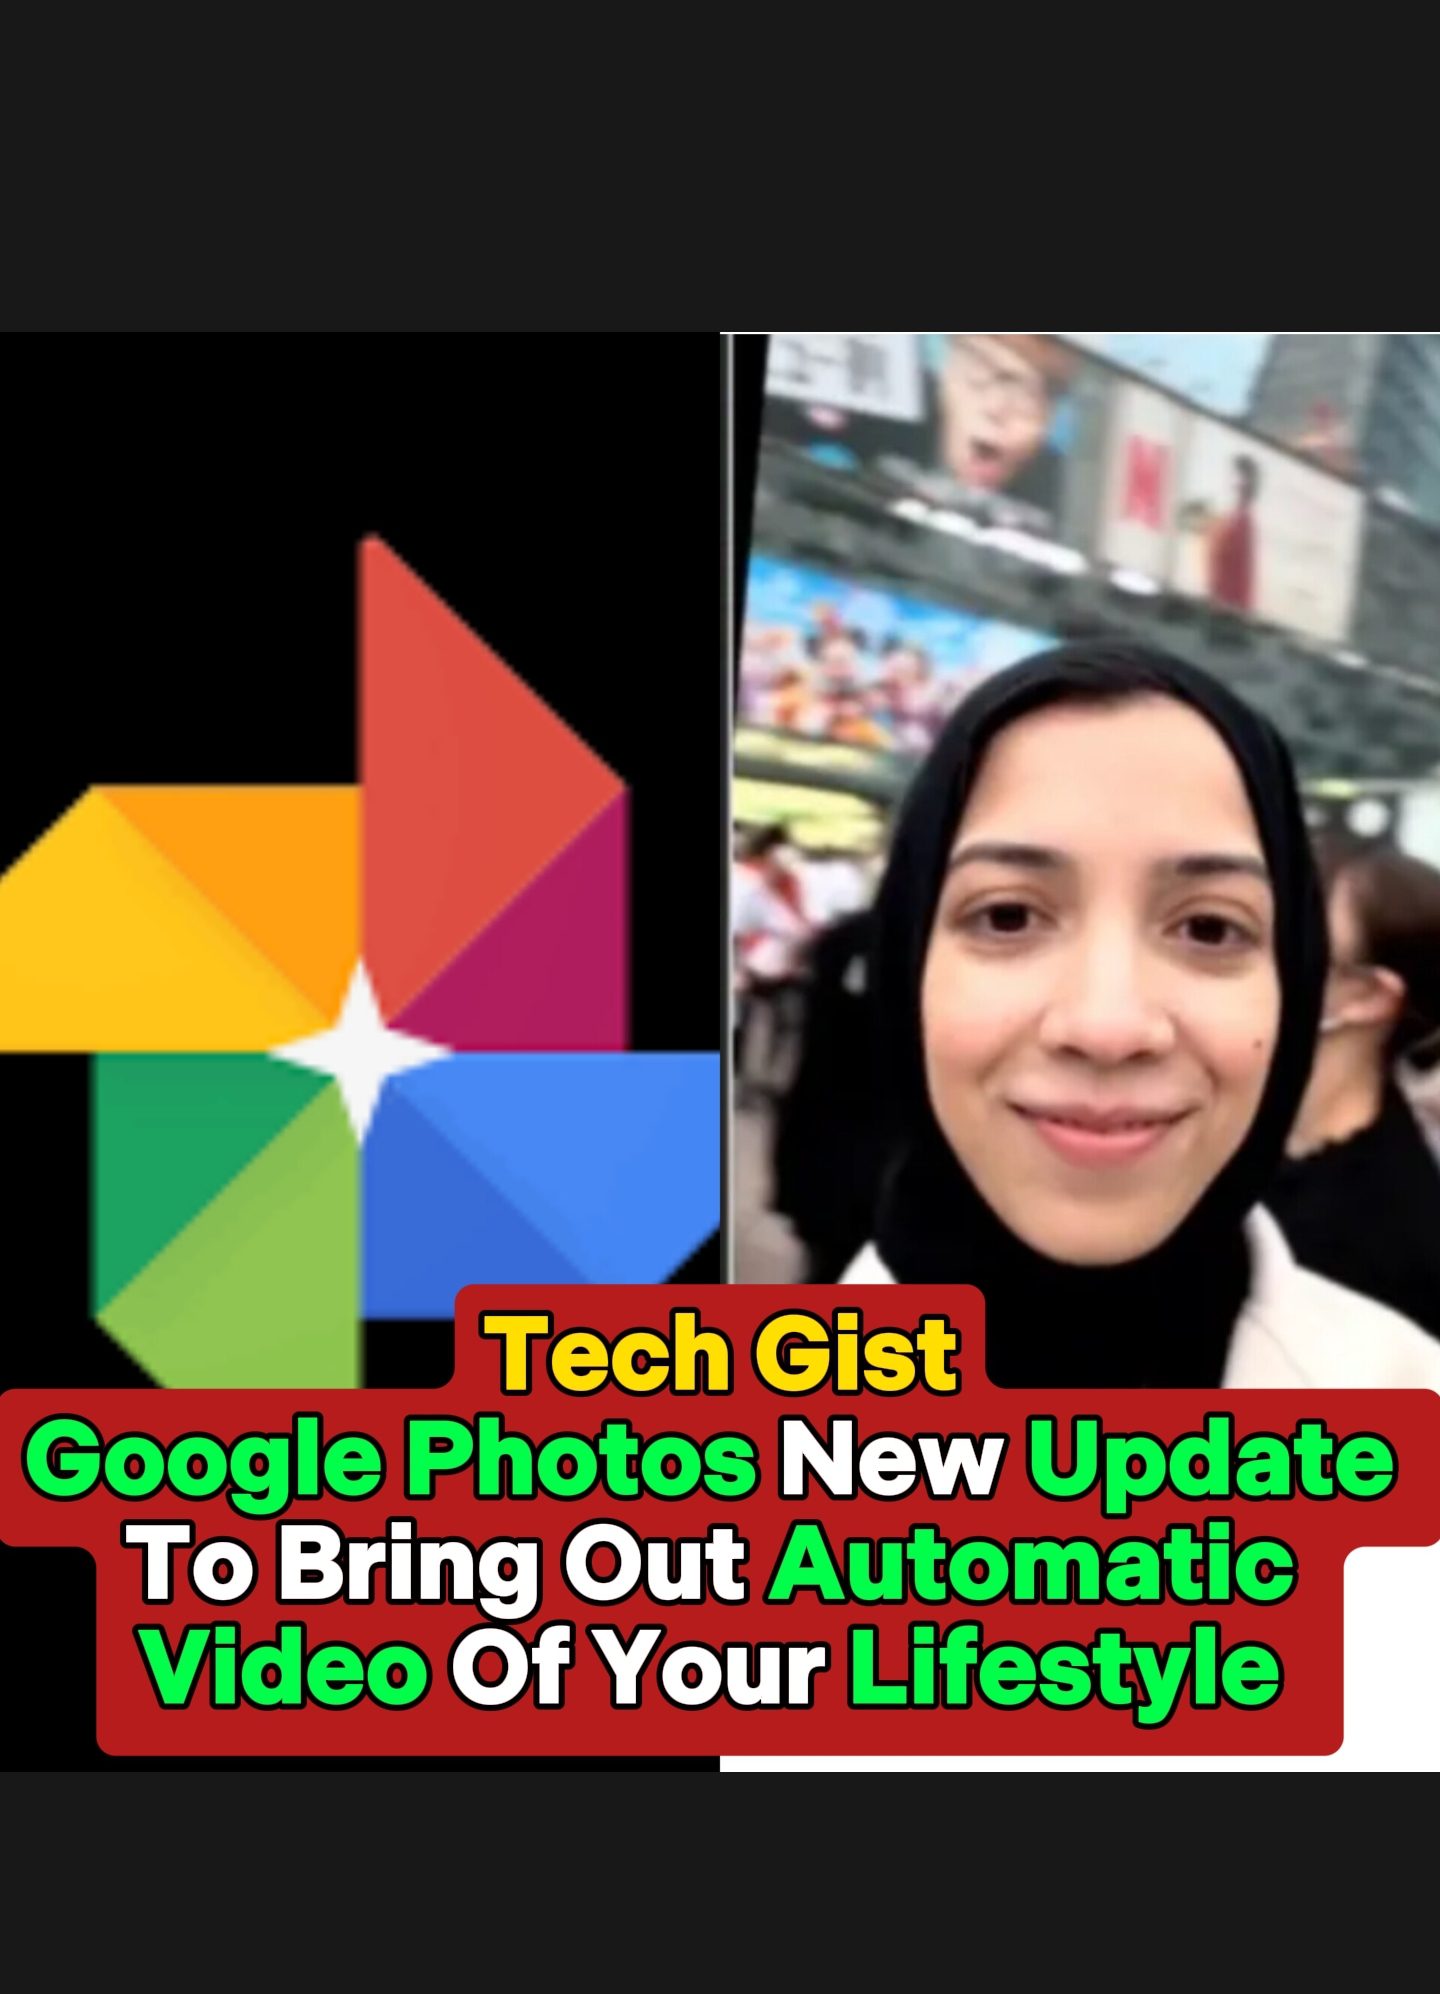 Google Photos New Update To Bring Out Automatic Video Of Your Lifestyle (Check It Out Now)